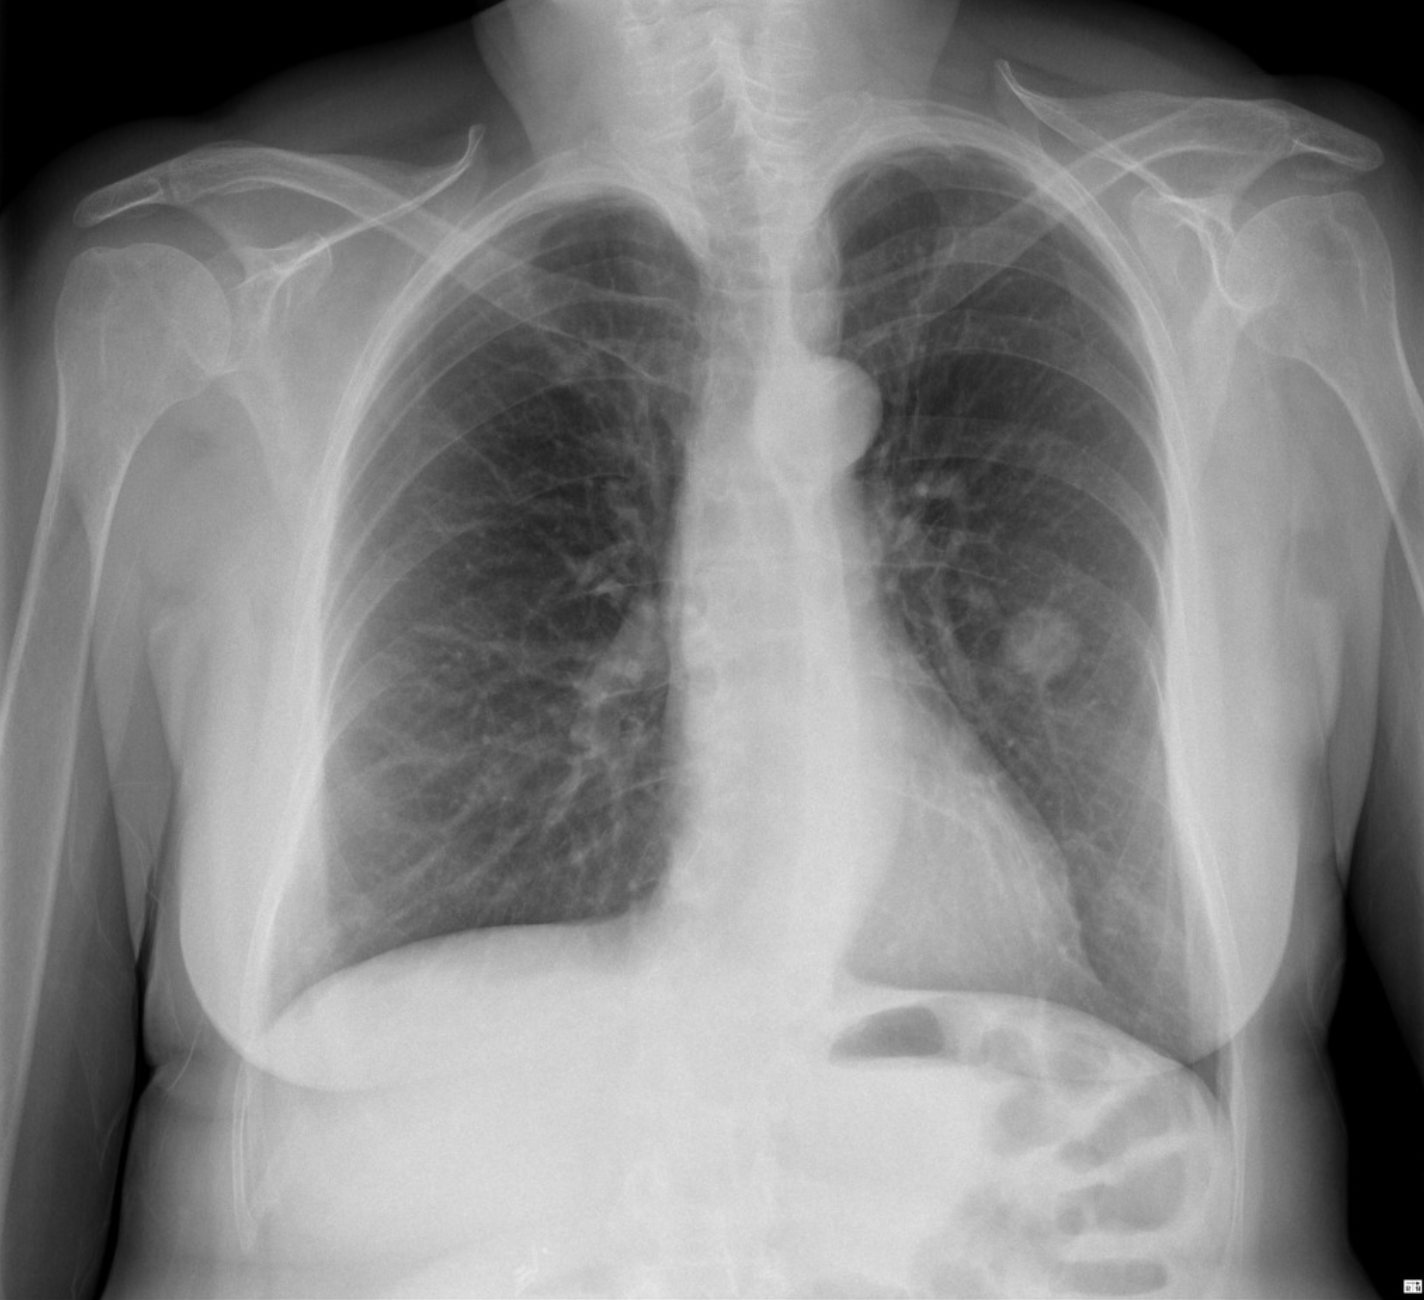 Chest X-ray (CXR) shows a well circumscribed lesion in the left middle lobe.